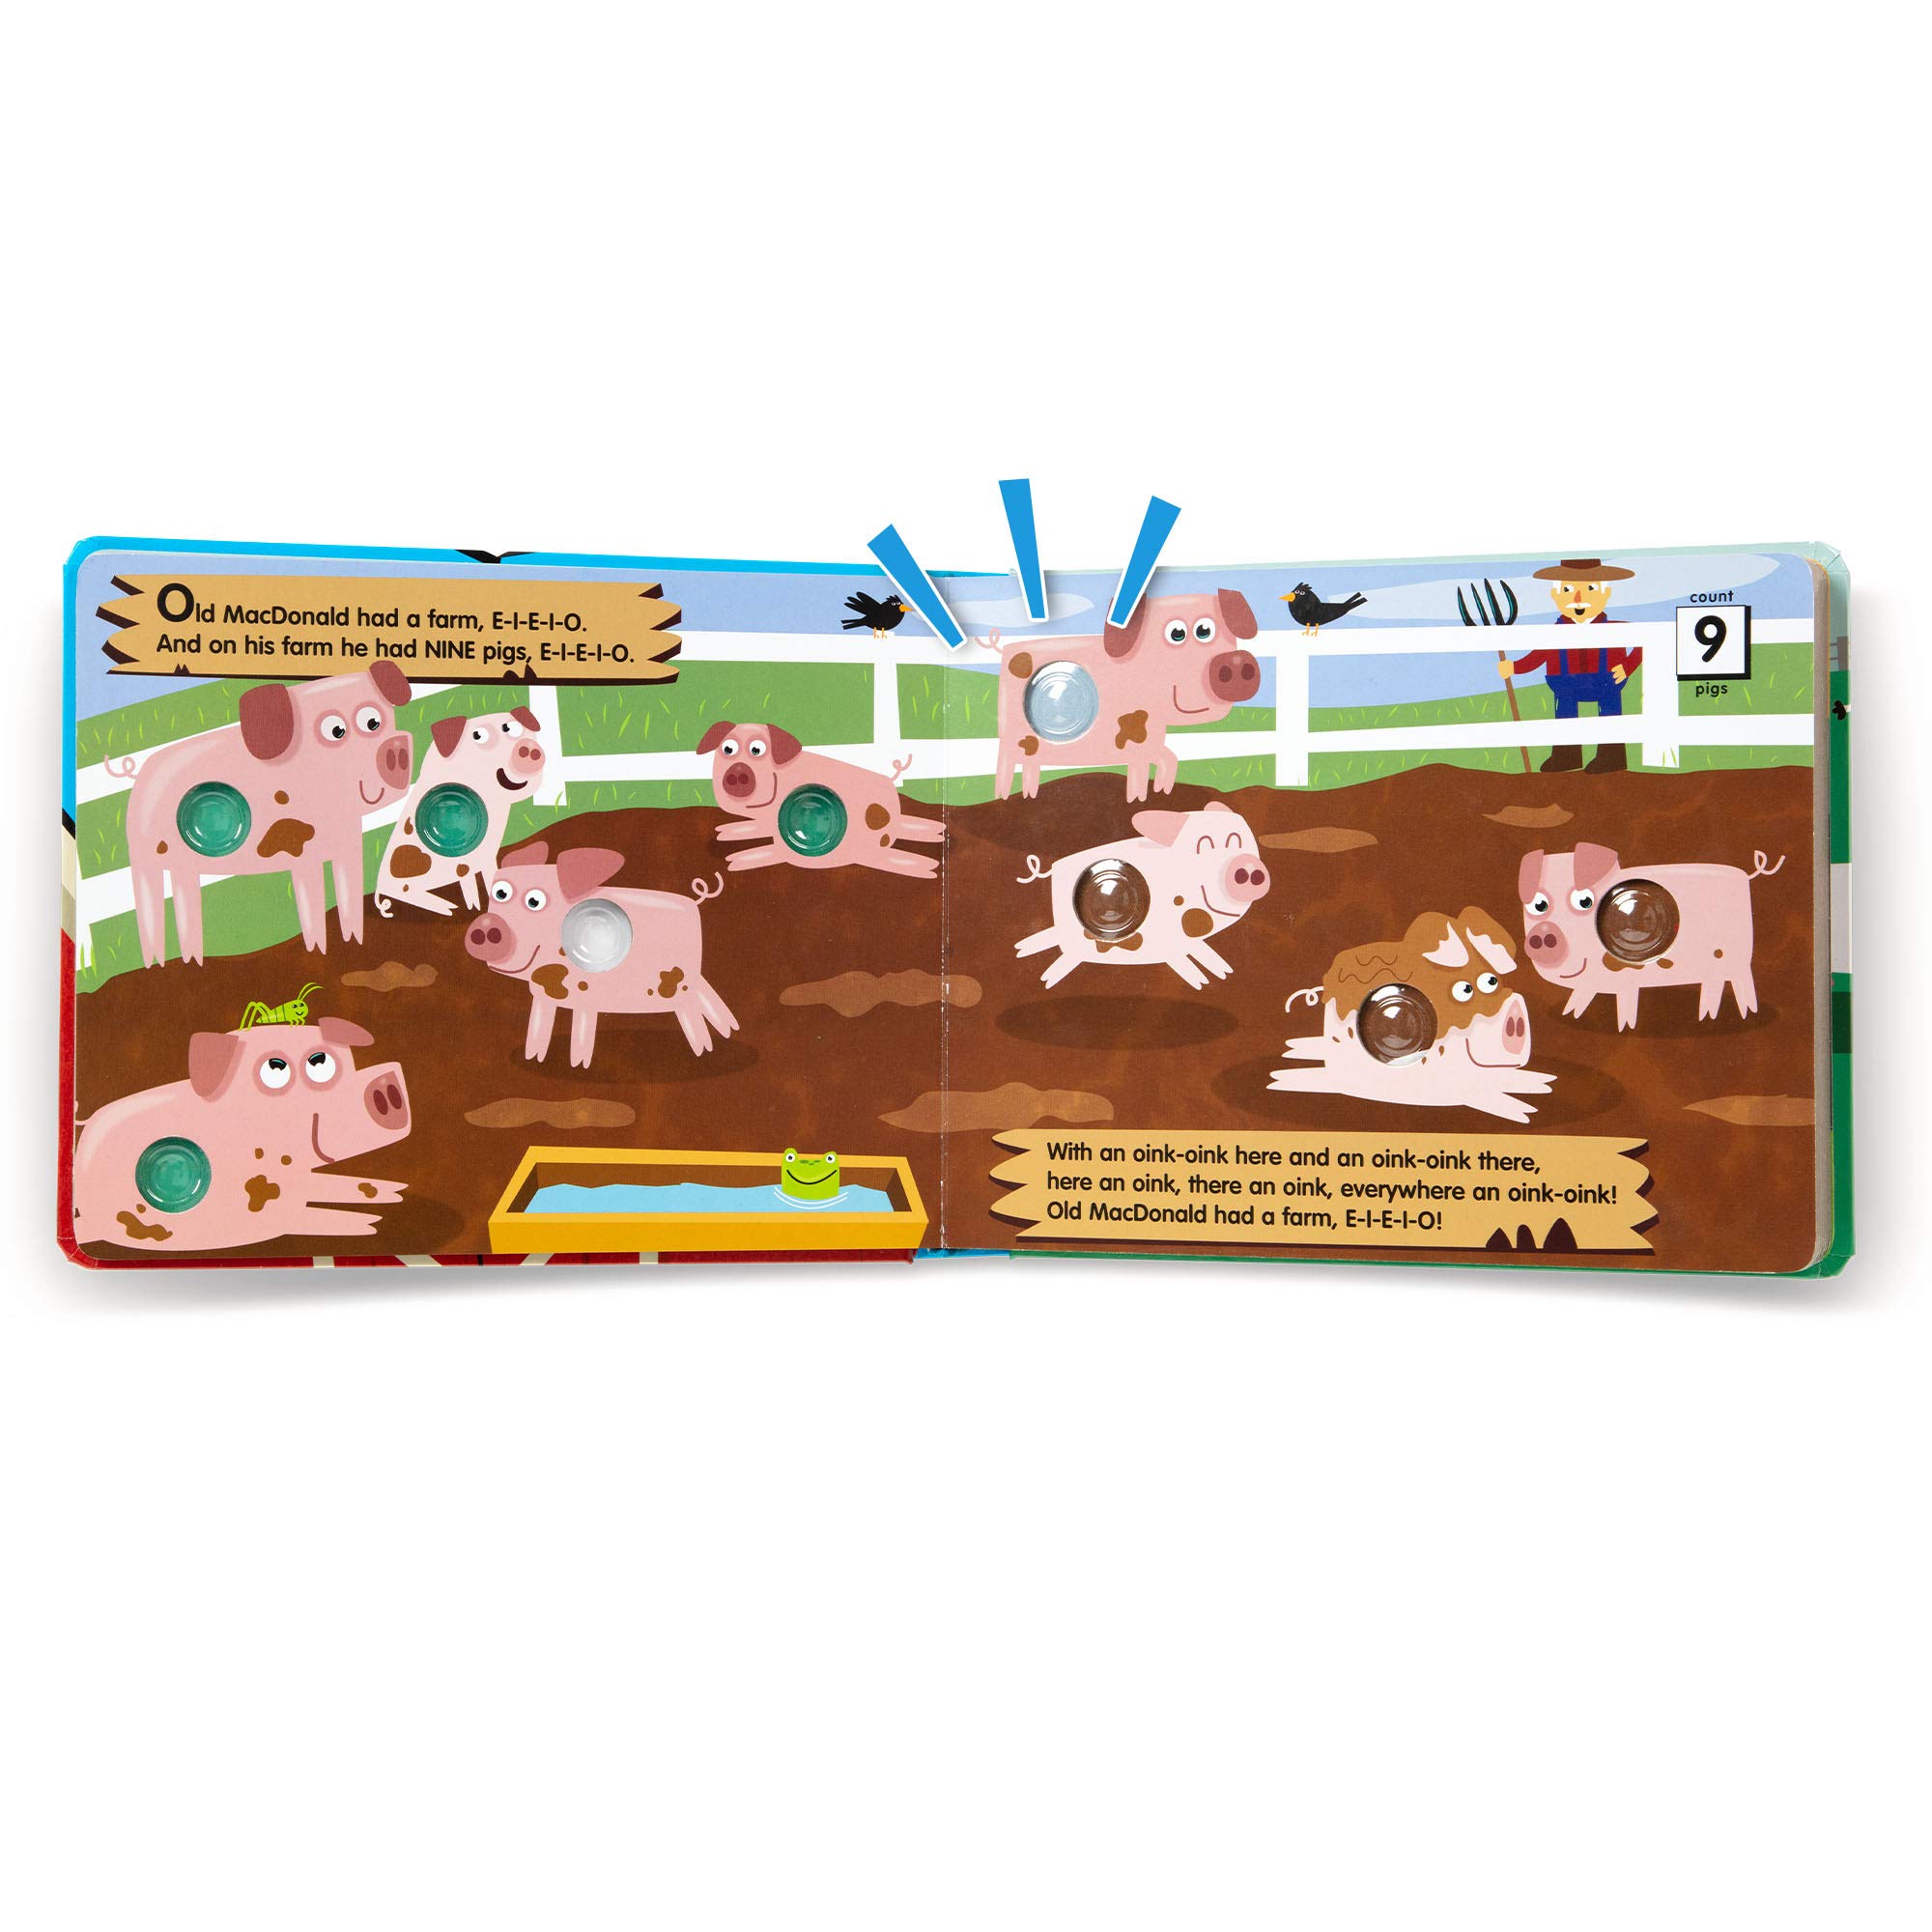 Melissa & Doug Children's Book - Poke-a-Dot: Old MacDonald’s Farm (Board Book with Buttons to Pop) - Farmyard Pop It / Push Pop Book For Toddlers And Kids Ages 3+